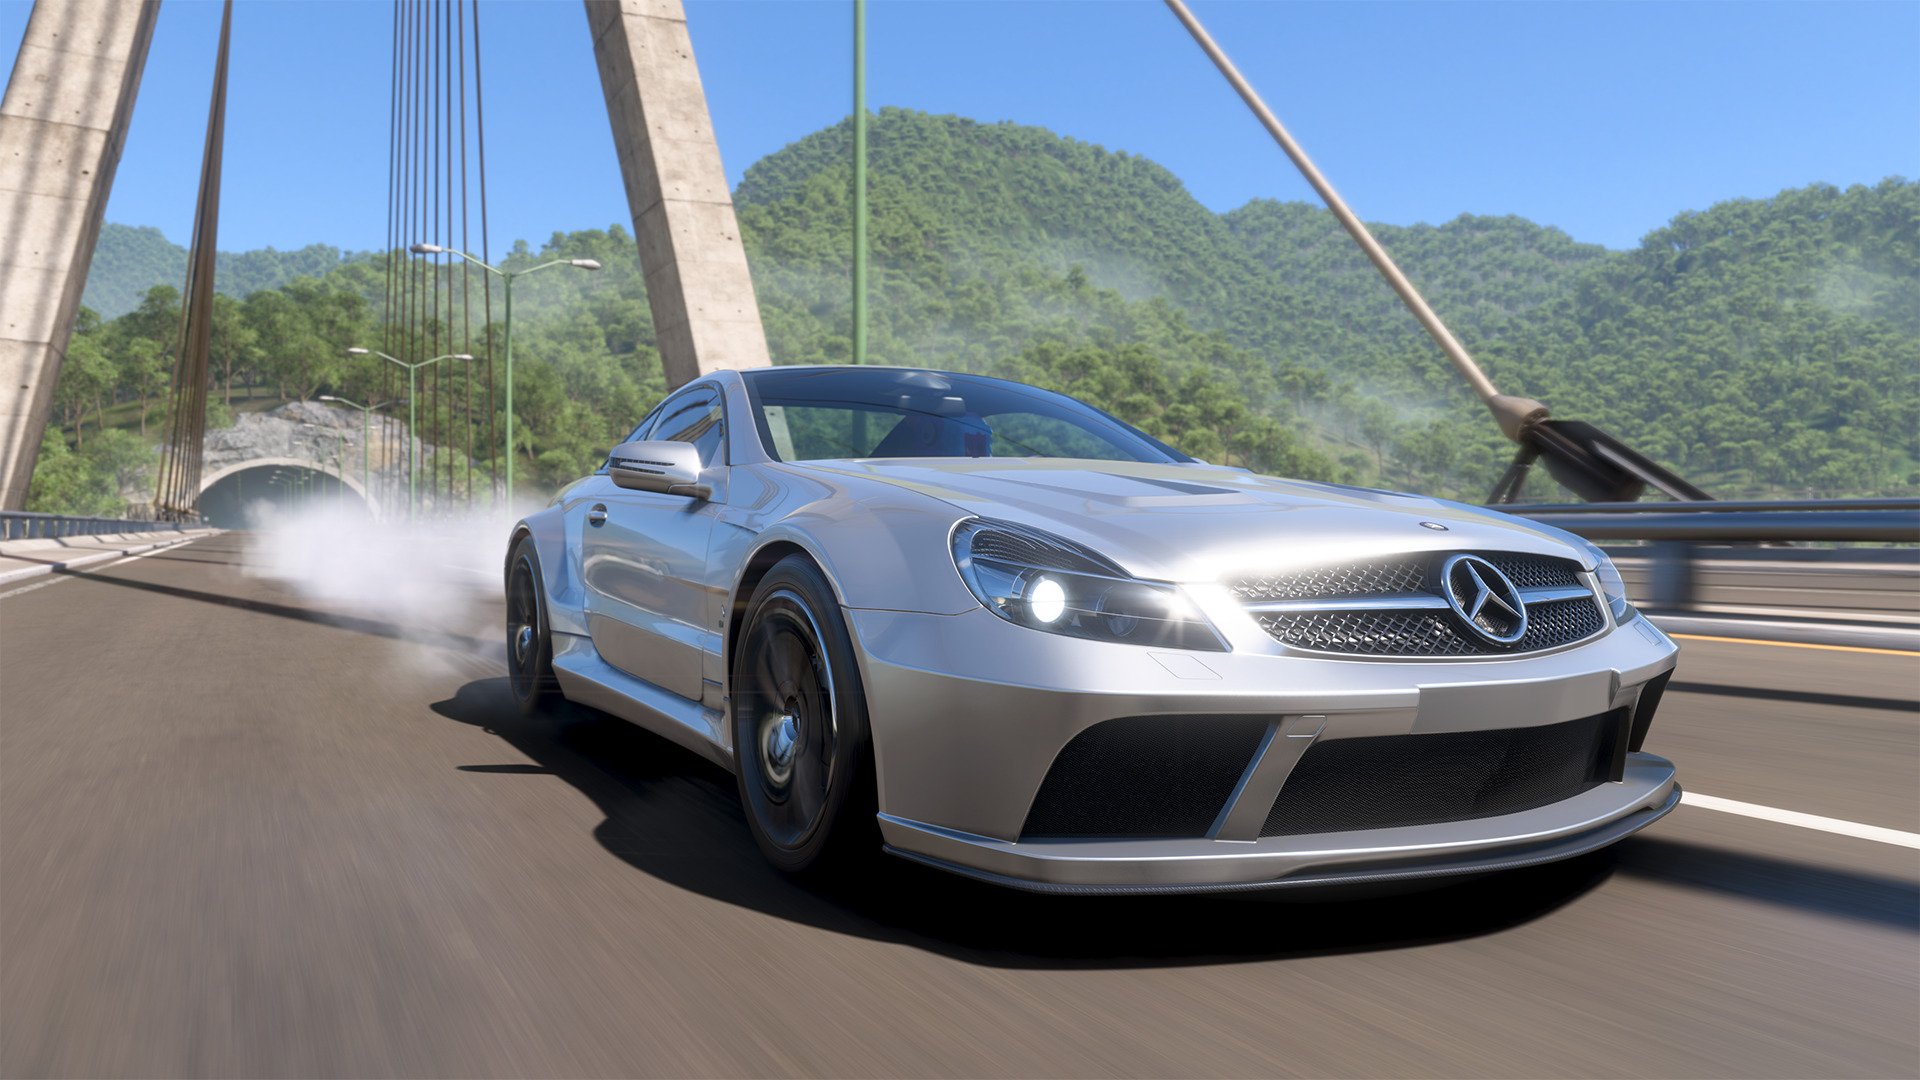 Forza Horizon 5: Hot Wheels is Now Available - Xbox Wire